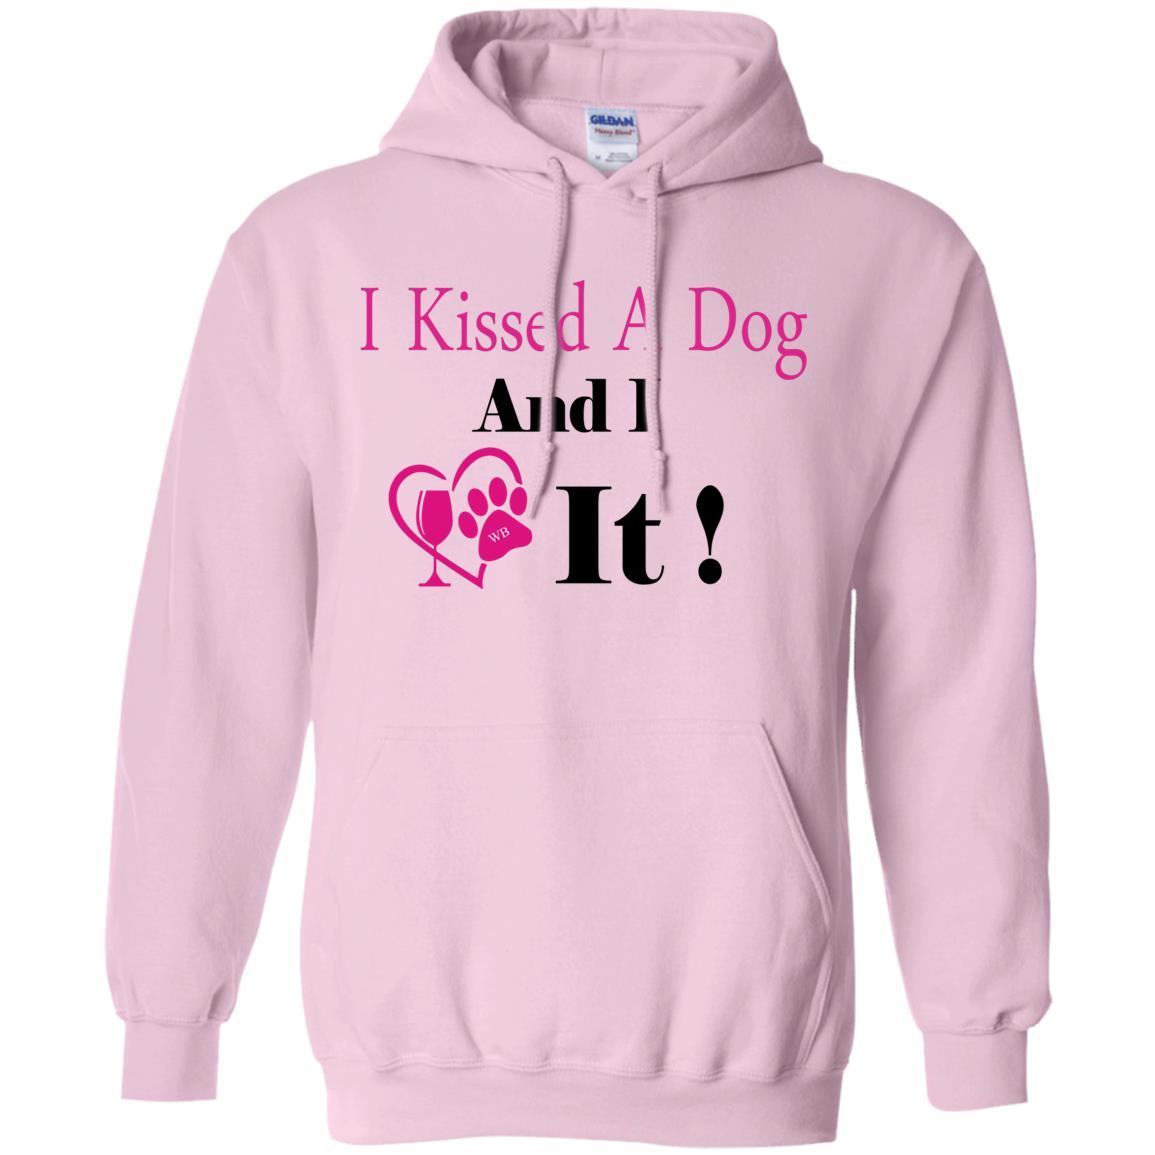 Sweatshirts Light Pink / S WineyBitches.co "I Kissed A Dog And I Loved It:"  Pullover Unisex Hoodie 8 oz. WineyBitchesCo